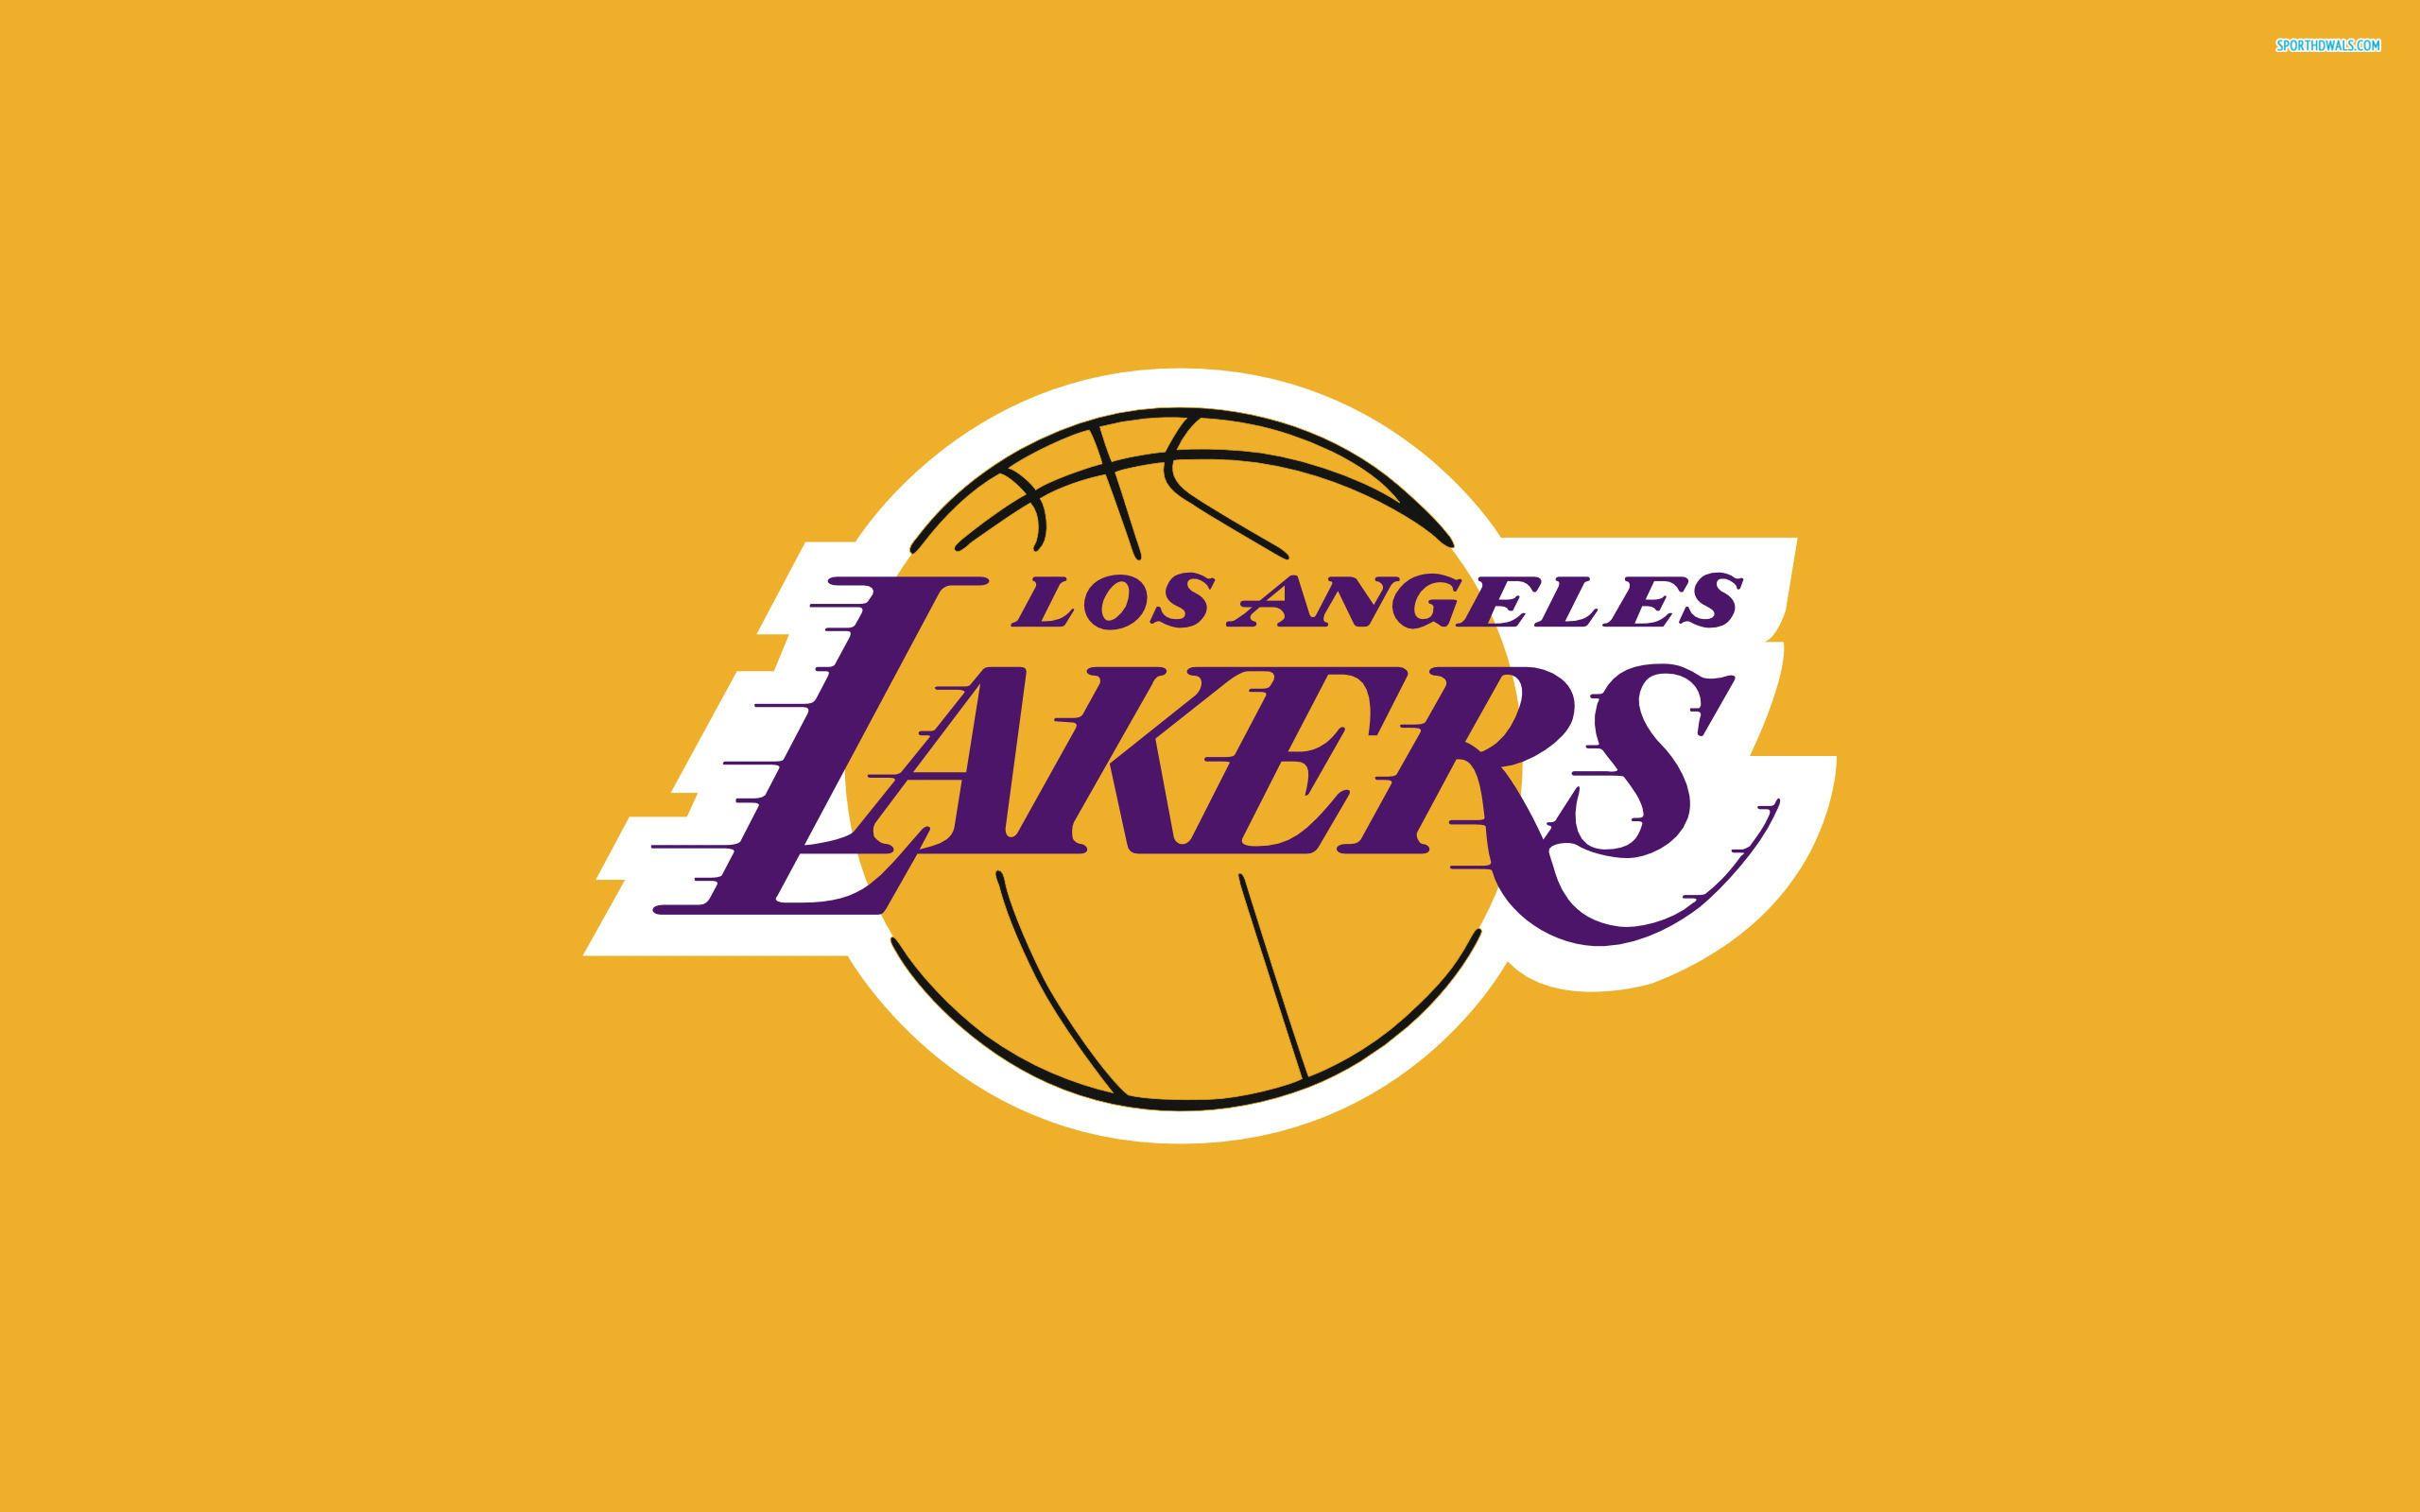 Los Angeles Lakers Wallpapers 
 Data-src /full/1109449 - Los Angeles Lakers Logo Yellow - HD Wallpaper 